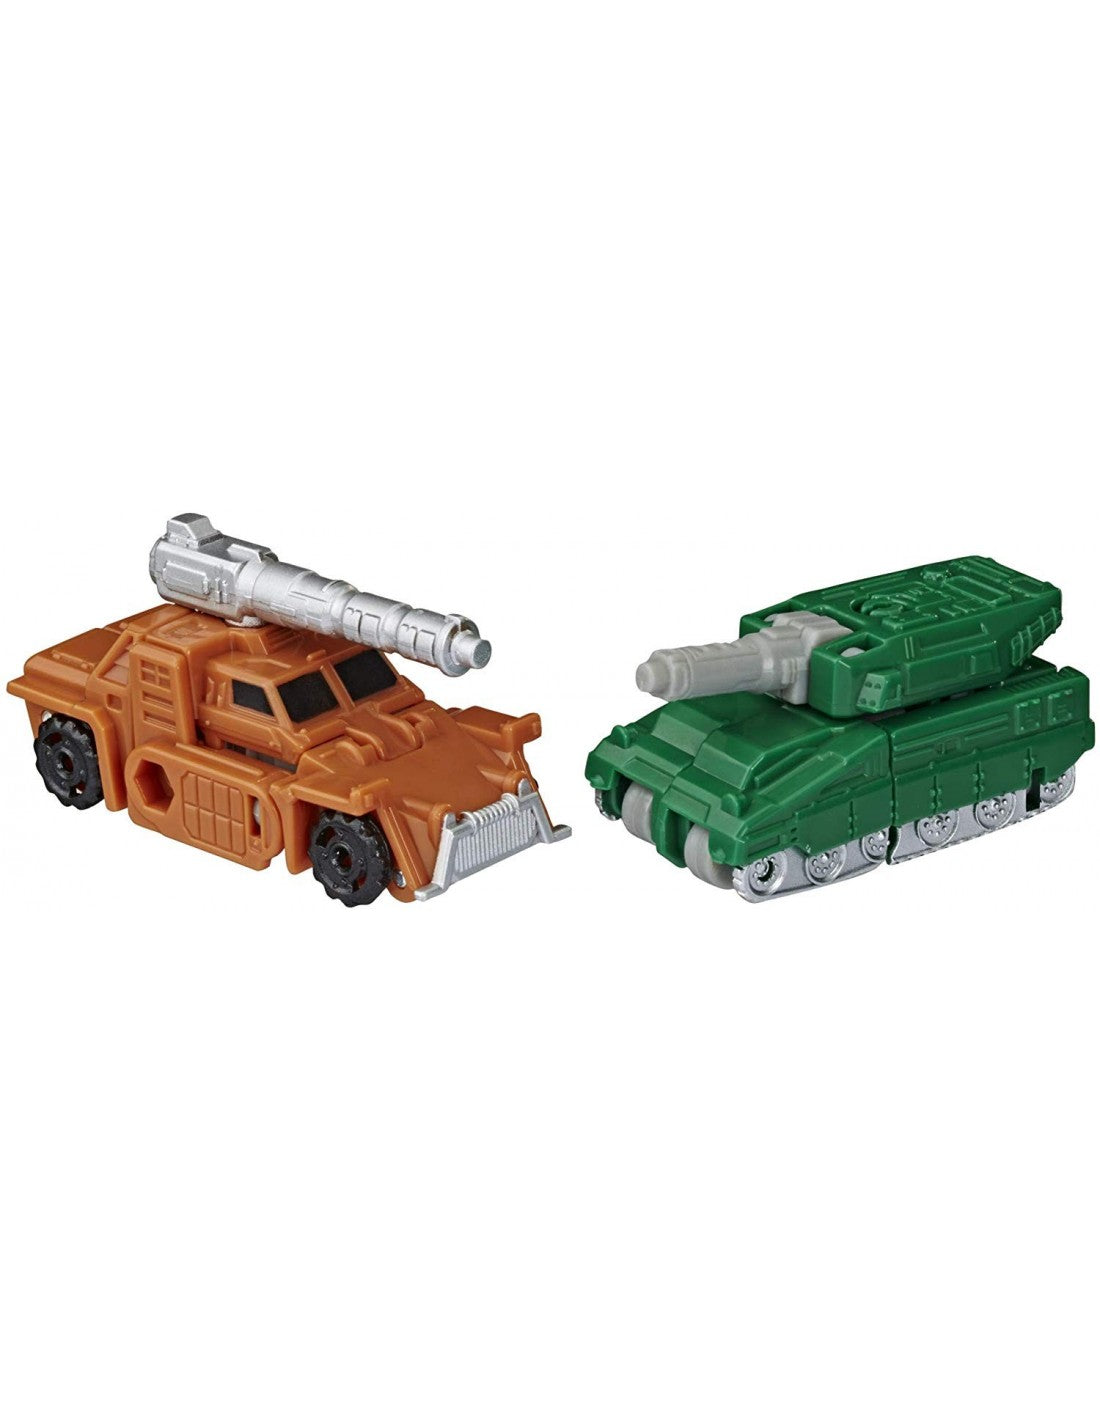 Transformers - Generations War for Cybertron Micromaster (Styles Vary)